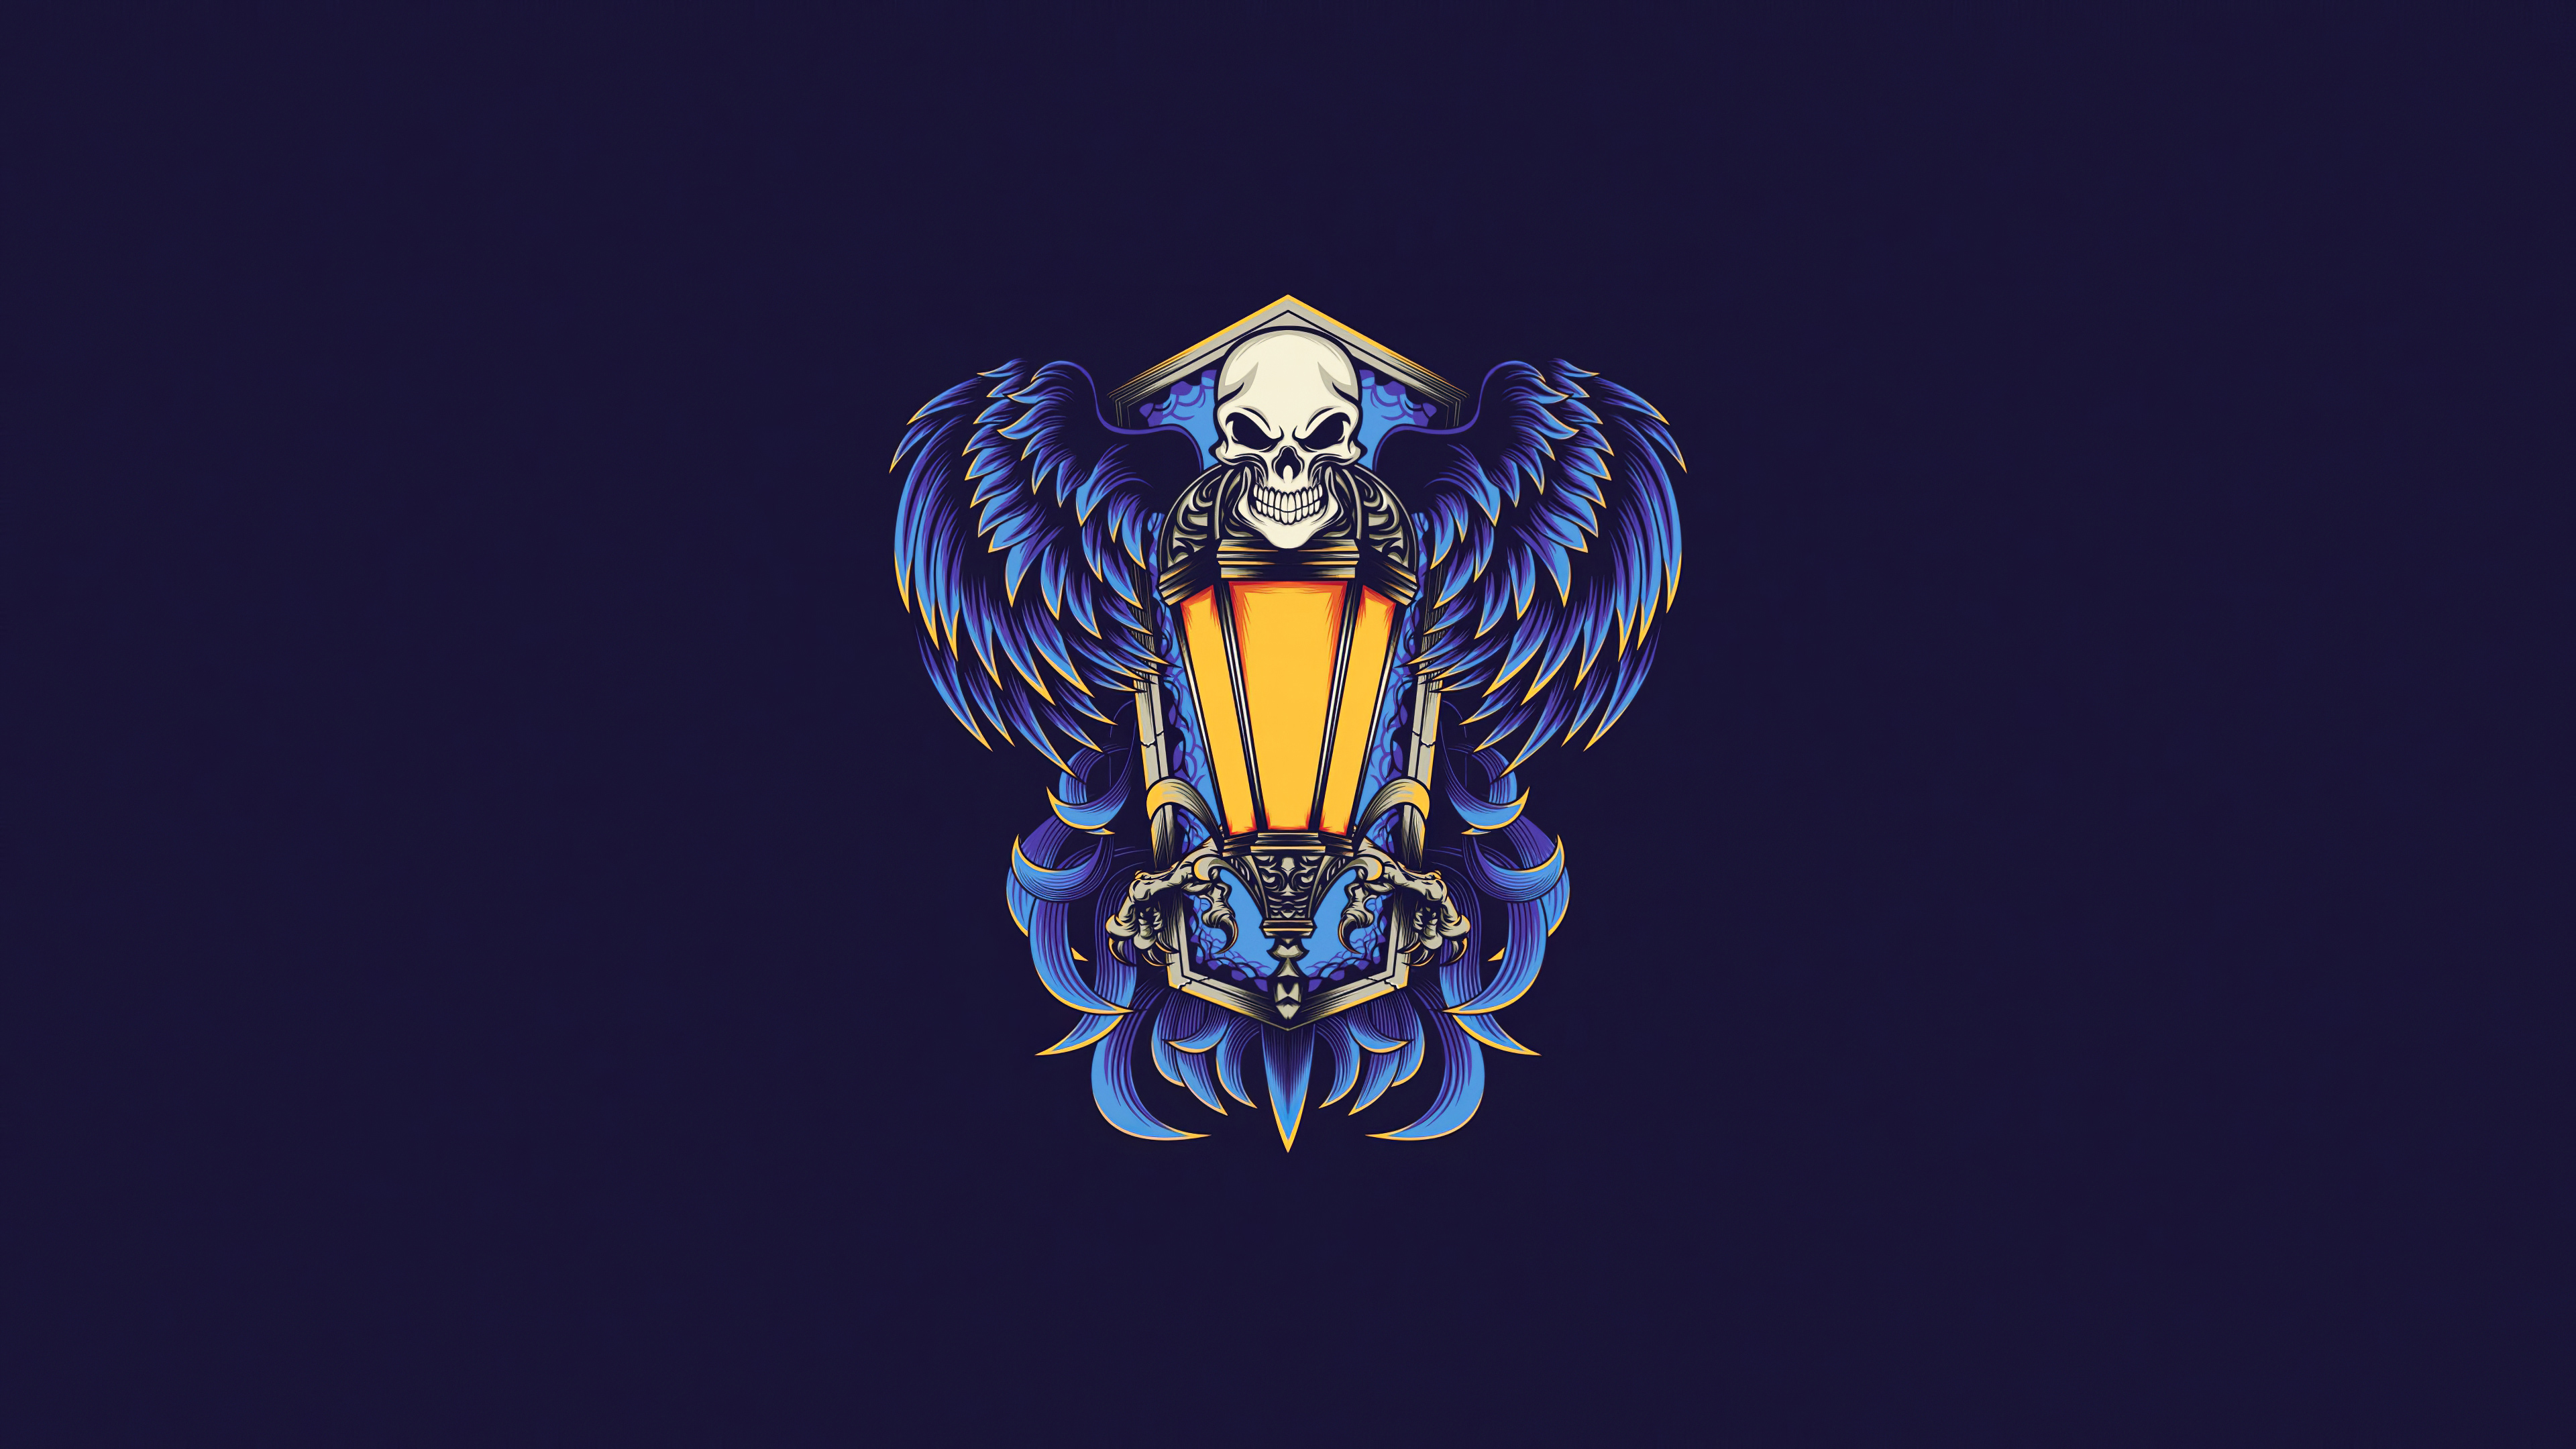 Gold and Blue Dragon Logo. Wallpaper in 3840x2160 Resolution